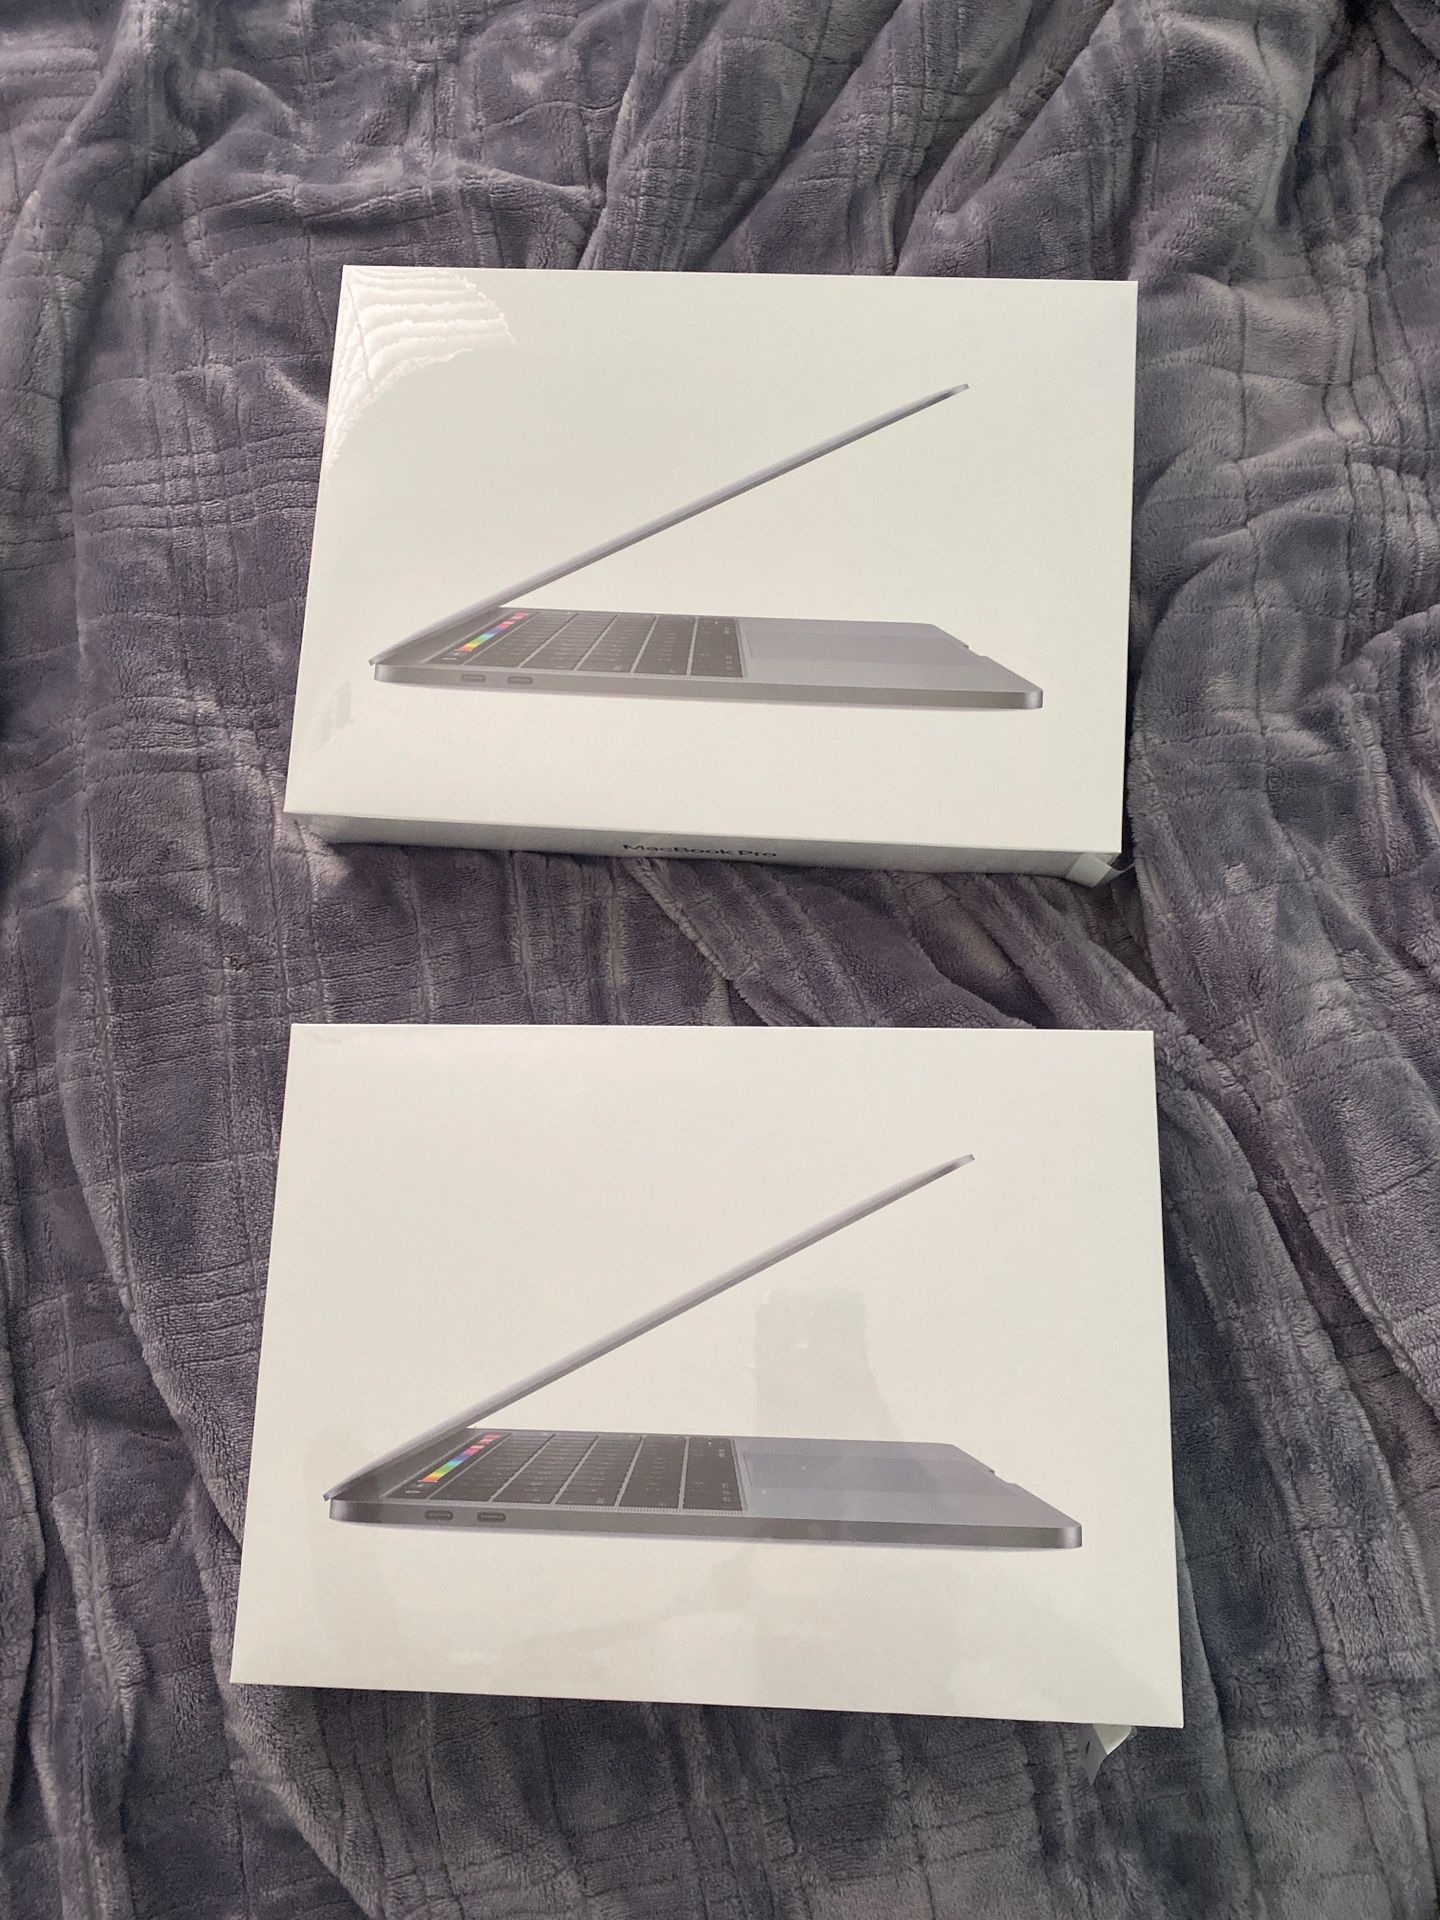 MacBook Pro w/ Touch Bar (late 2019) NEW